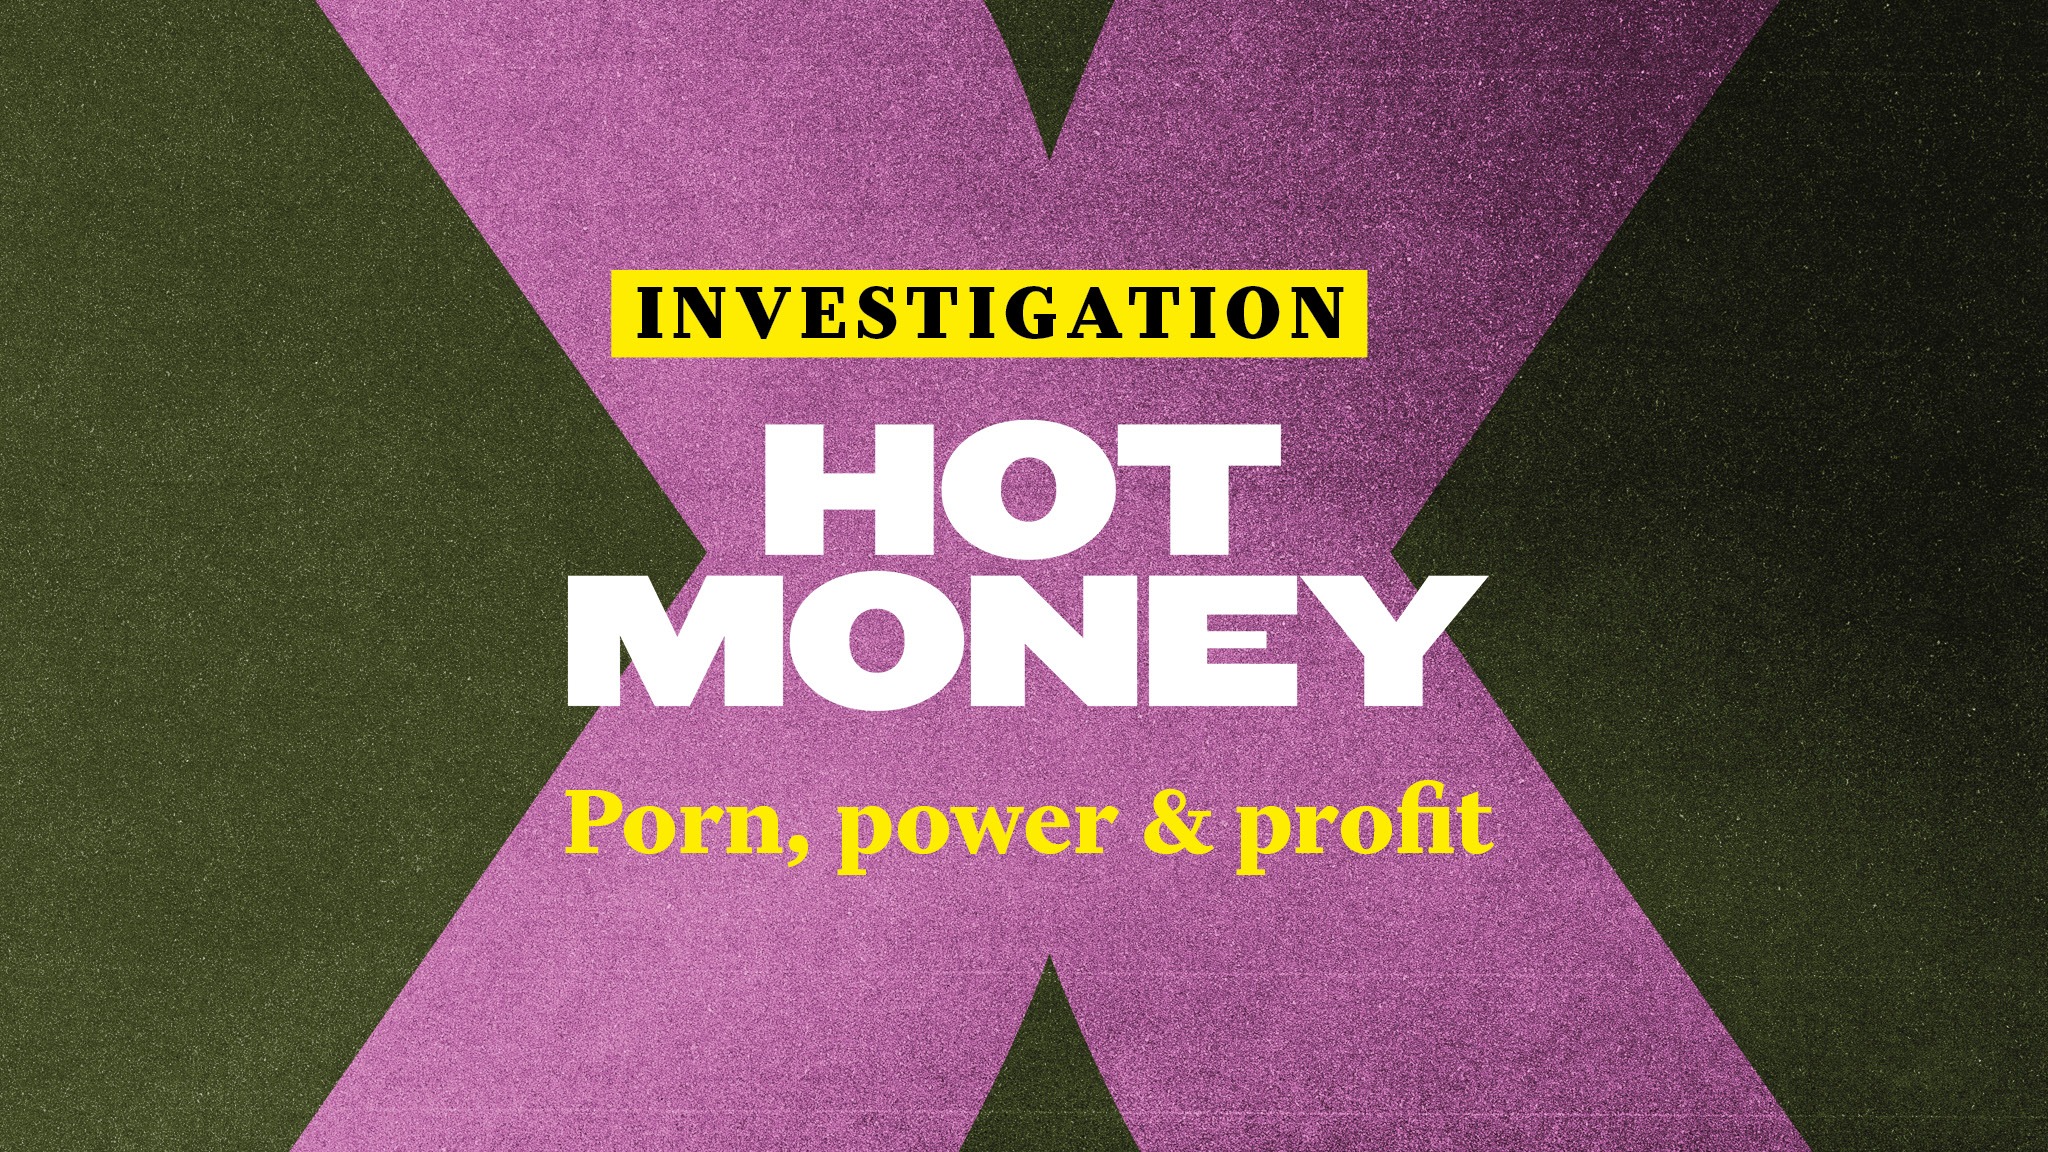 Pree Pron Video - Hot Money: porn, power and profit | Financial Times